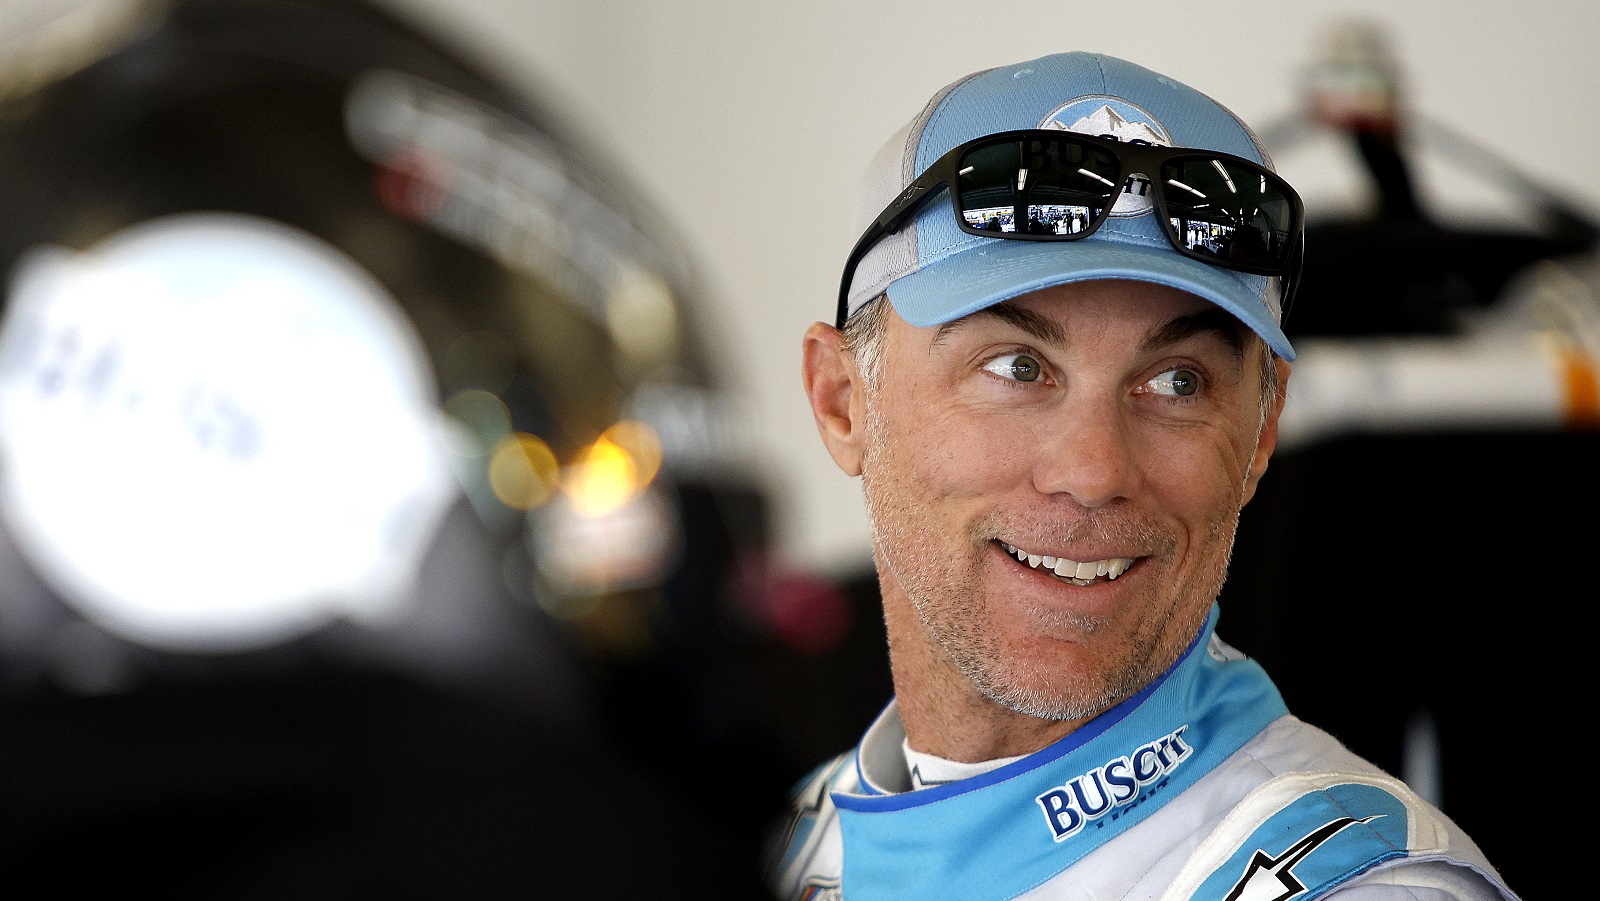 Kevin Harvick’s Tirade Shows He Would Fit Right in as an NFL Quarterback, a Fellow NASCAR Driver Says